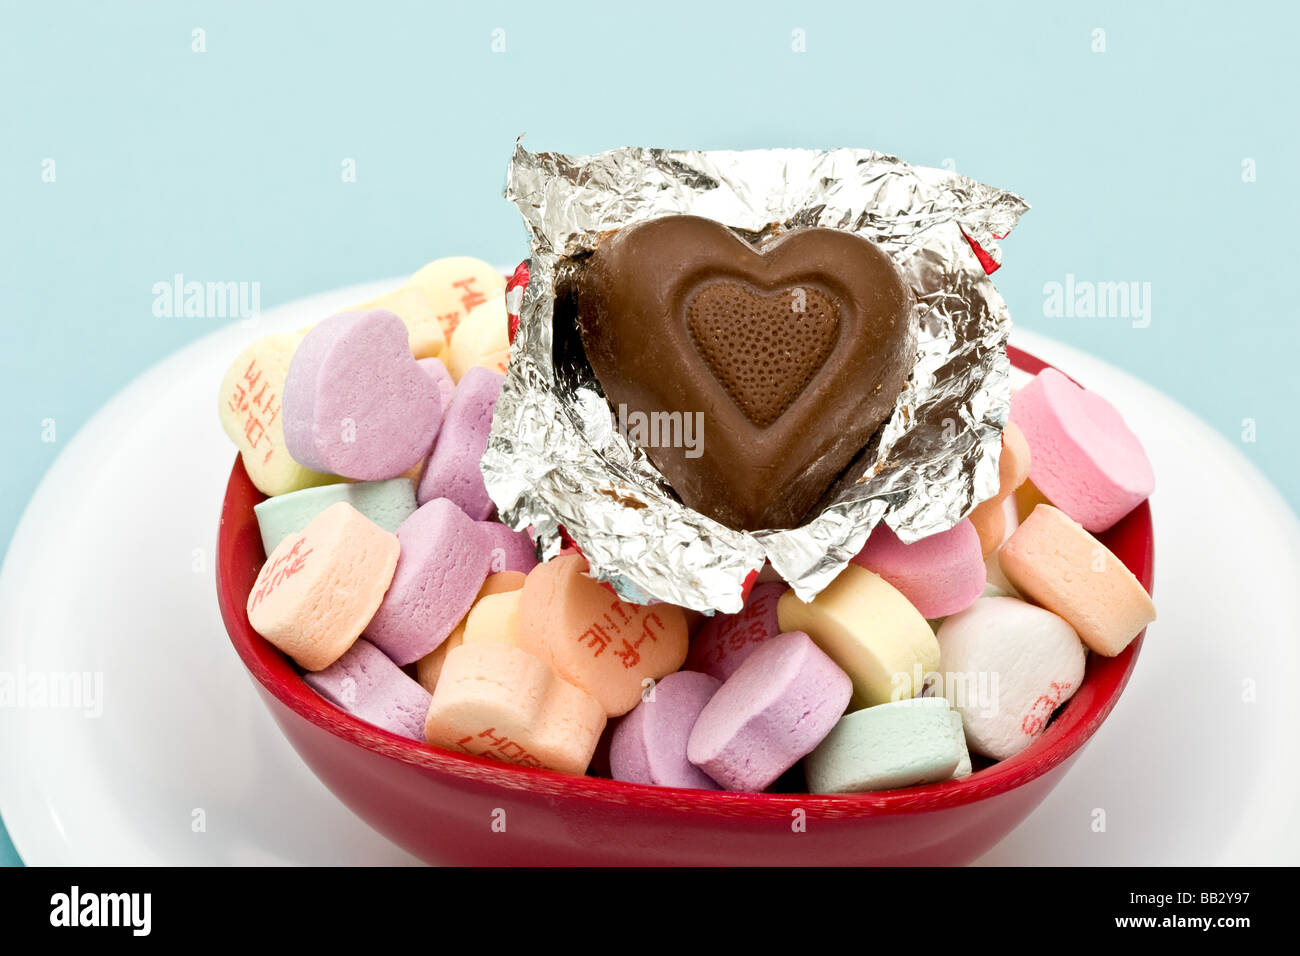 Heart shaped chocolate candy unwrapped atop of heart shaped hard candies Stock Photo